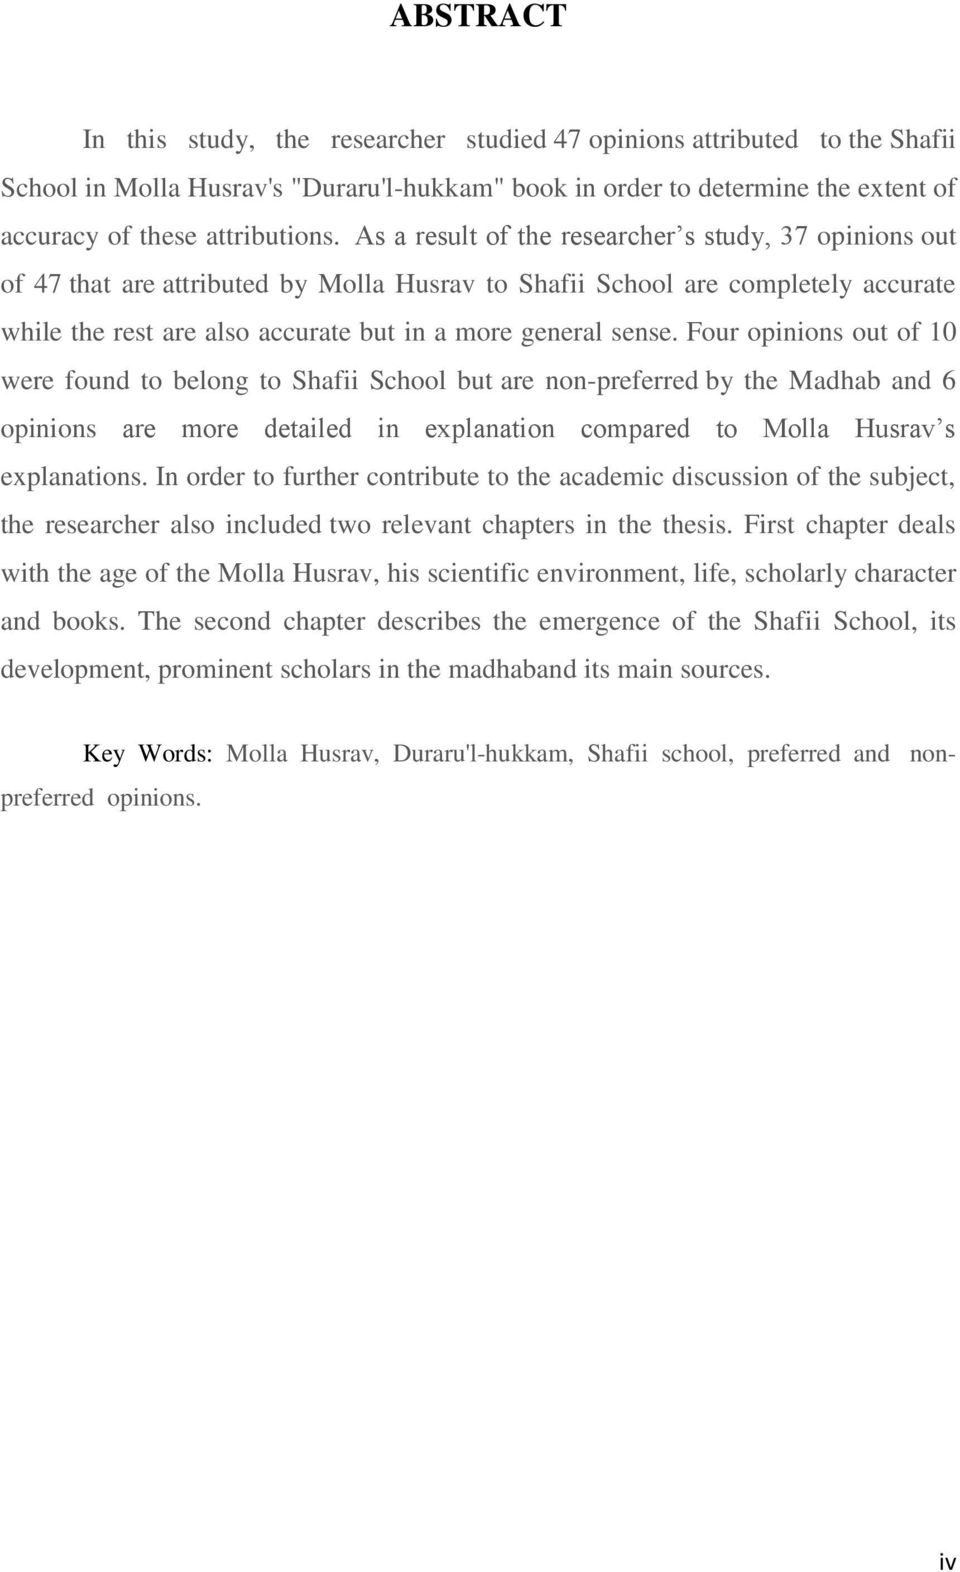 Four opinions out of 10 were found to belong to Shafii School but are non-preferred by the Madhab and 6 opinions are more detailed in explanation compared to Molla Husrav s explanations.